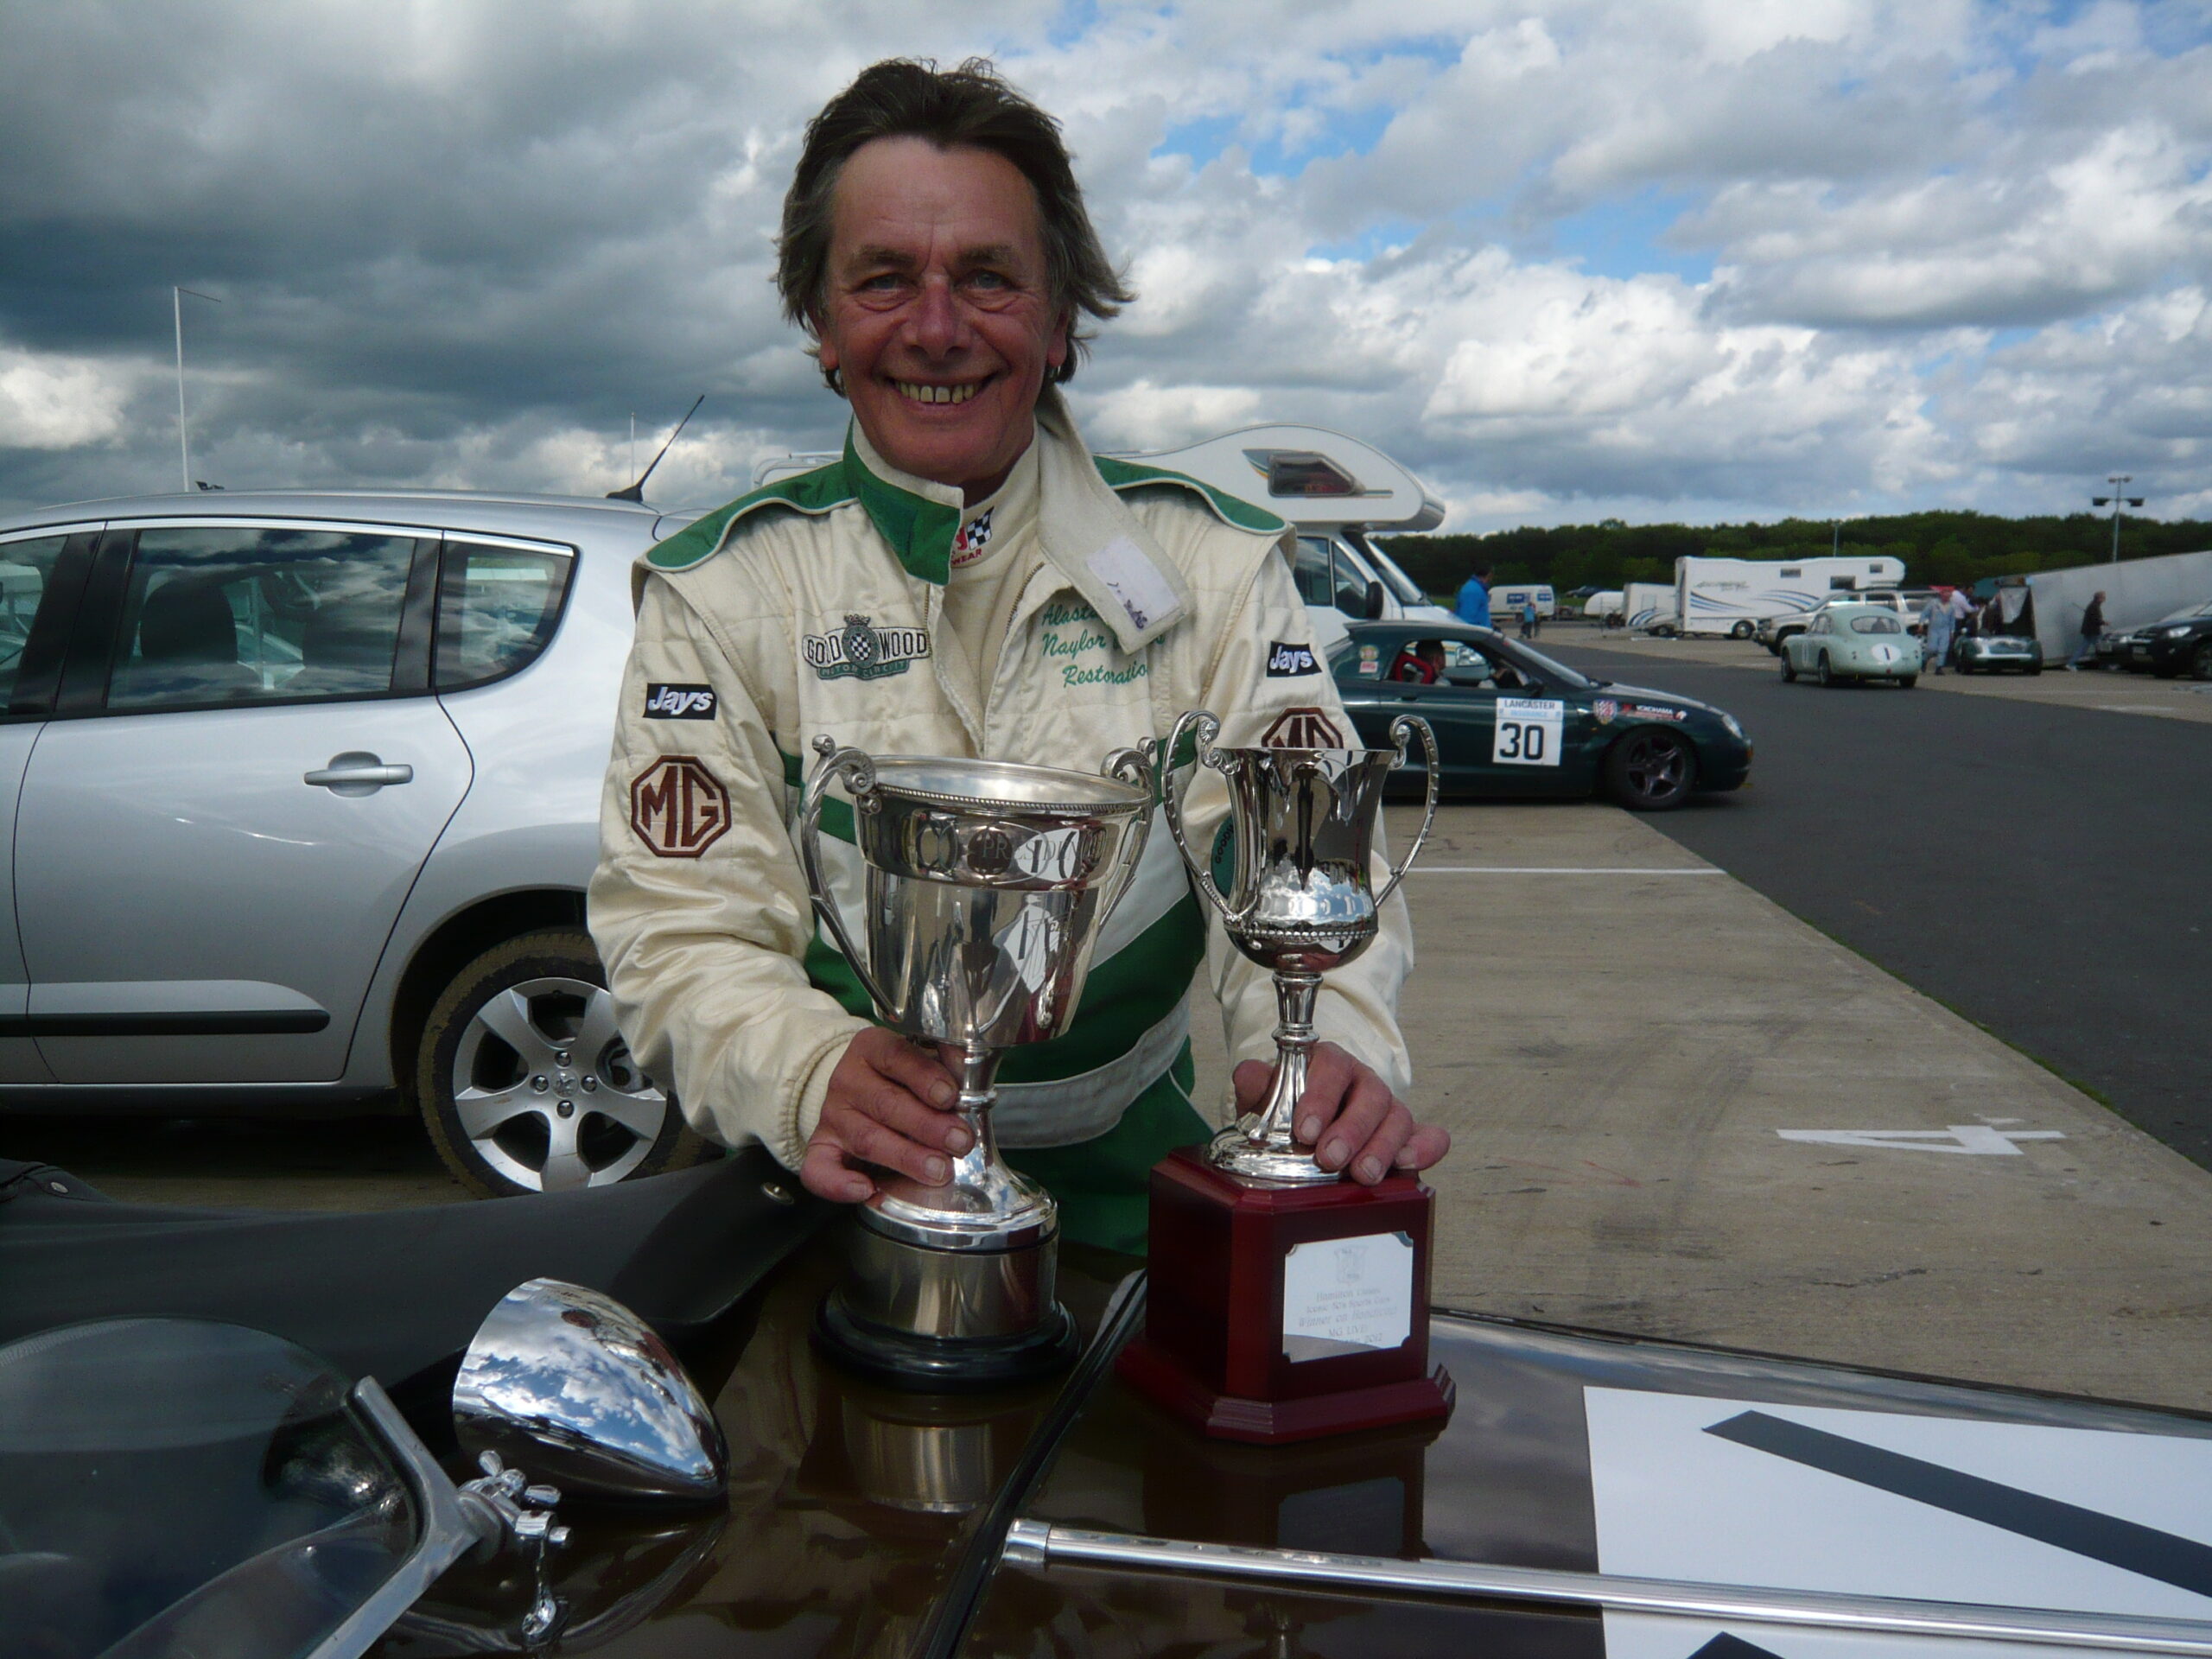 Alister Naylor winning at Silverstone